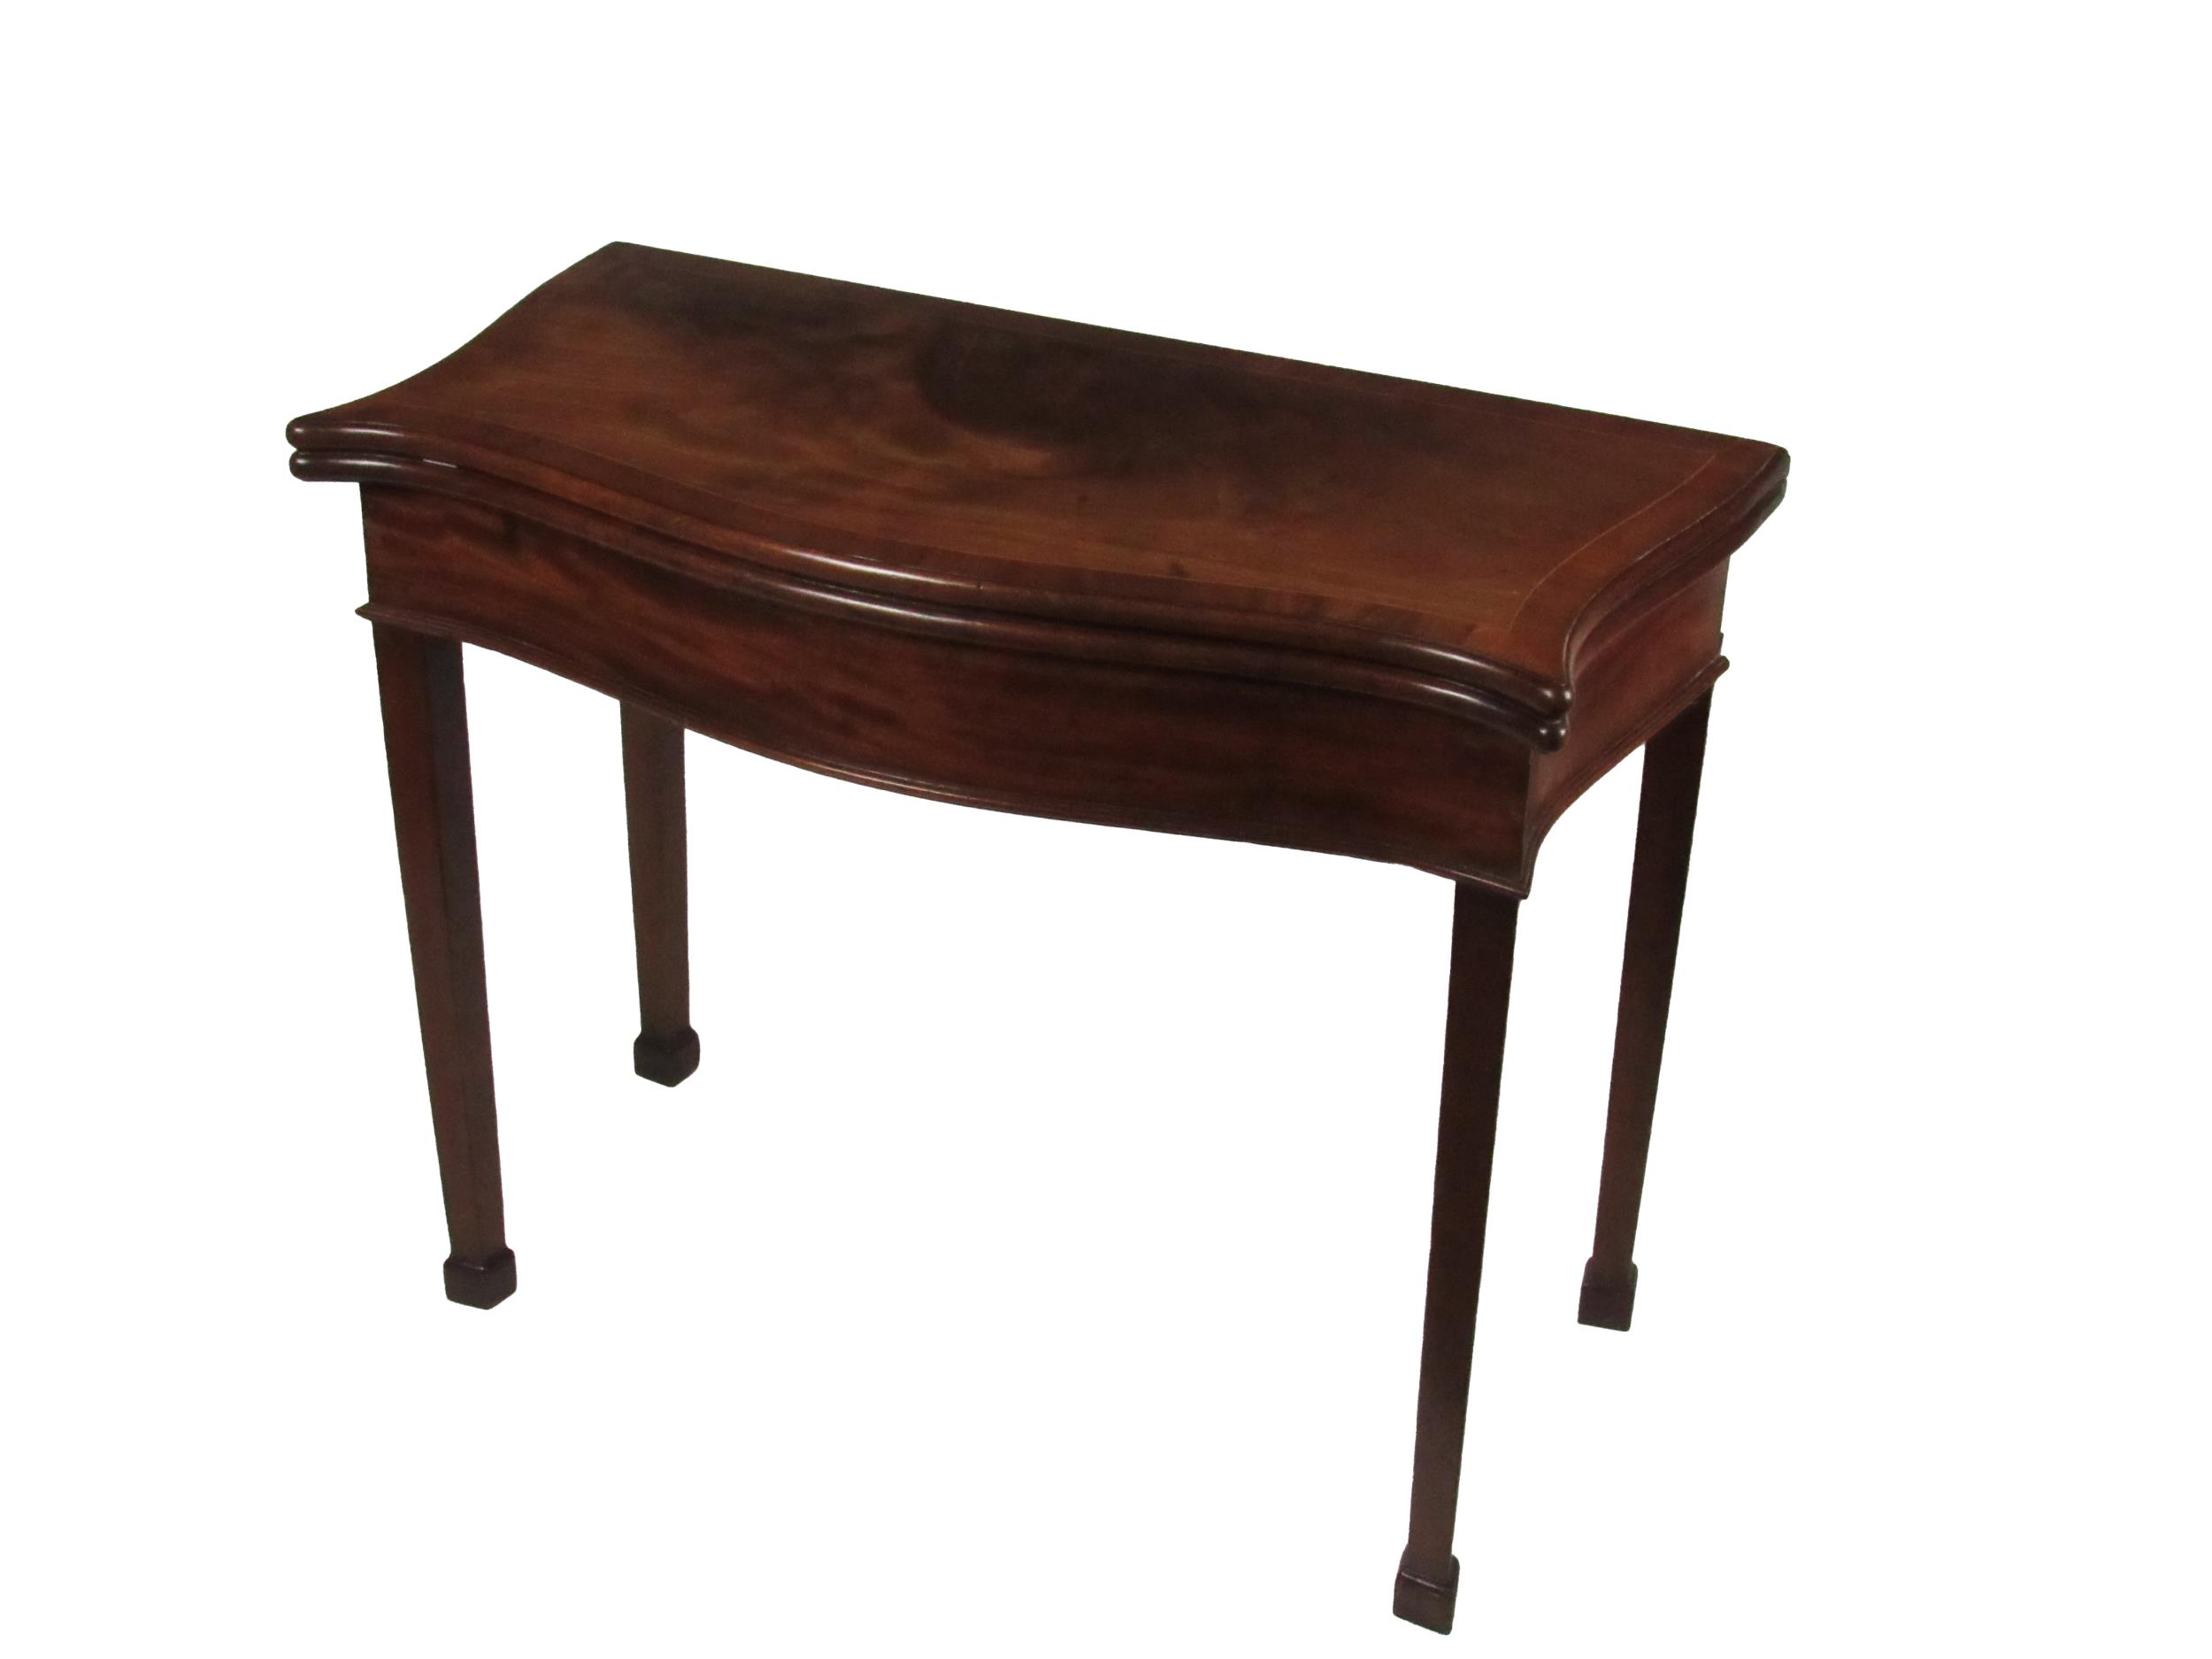 A Georgian mahogany serpentine shaped fold-over Card Table, the top with string inlay, opening to